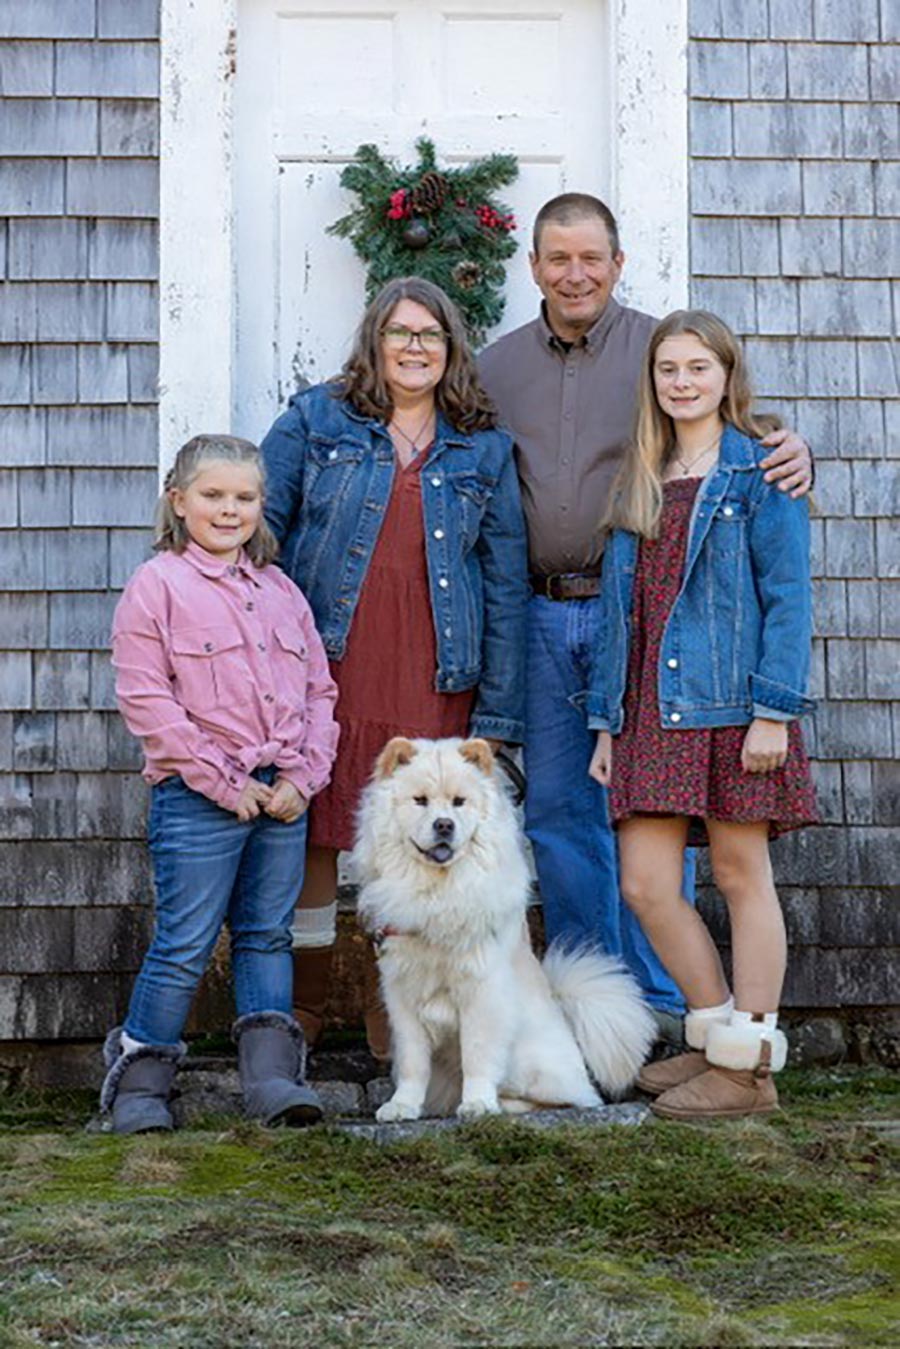 Portrait photograph of Karyn Ames '98 smiling in a dark maroon blouse dress and blue denim jacket standing beside her husband Jeff Polosky and their two daughters Marley and Kiya with the family dog below them as they stand outside their home in Moultonborough